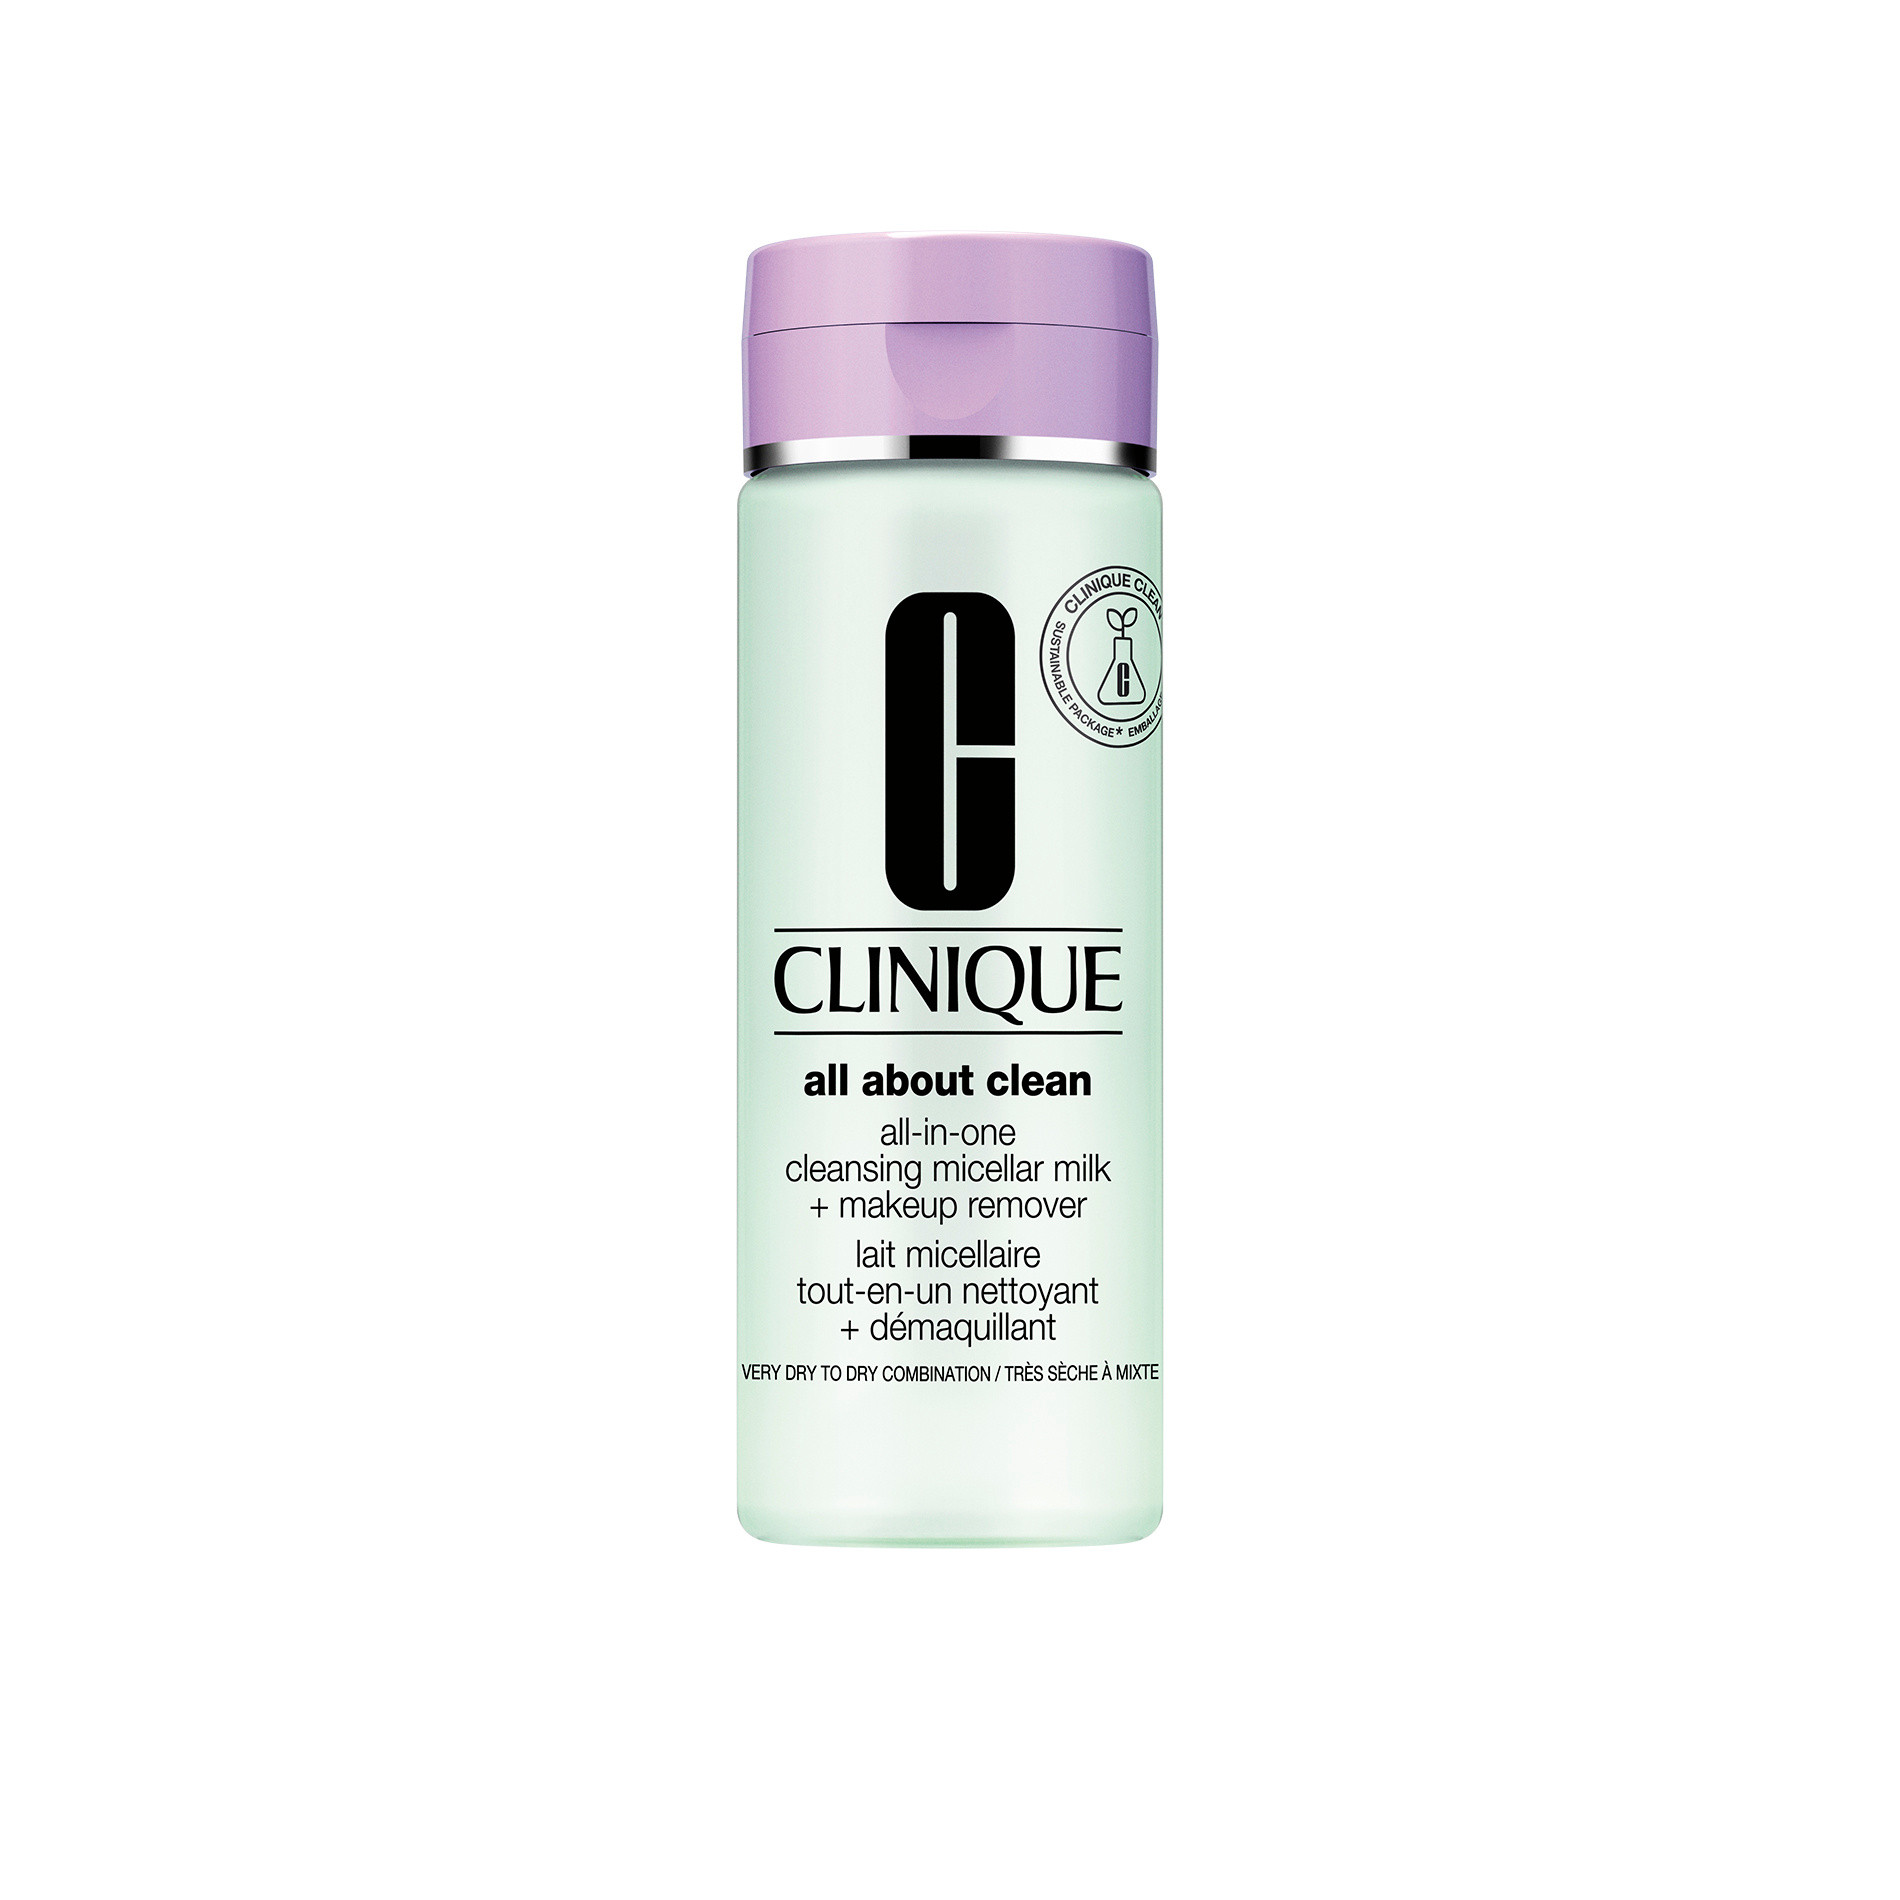 Clinique all in one cleansing micellar milk - 200 ml, Verde, large image number 0